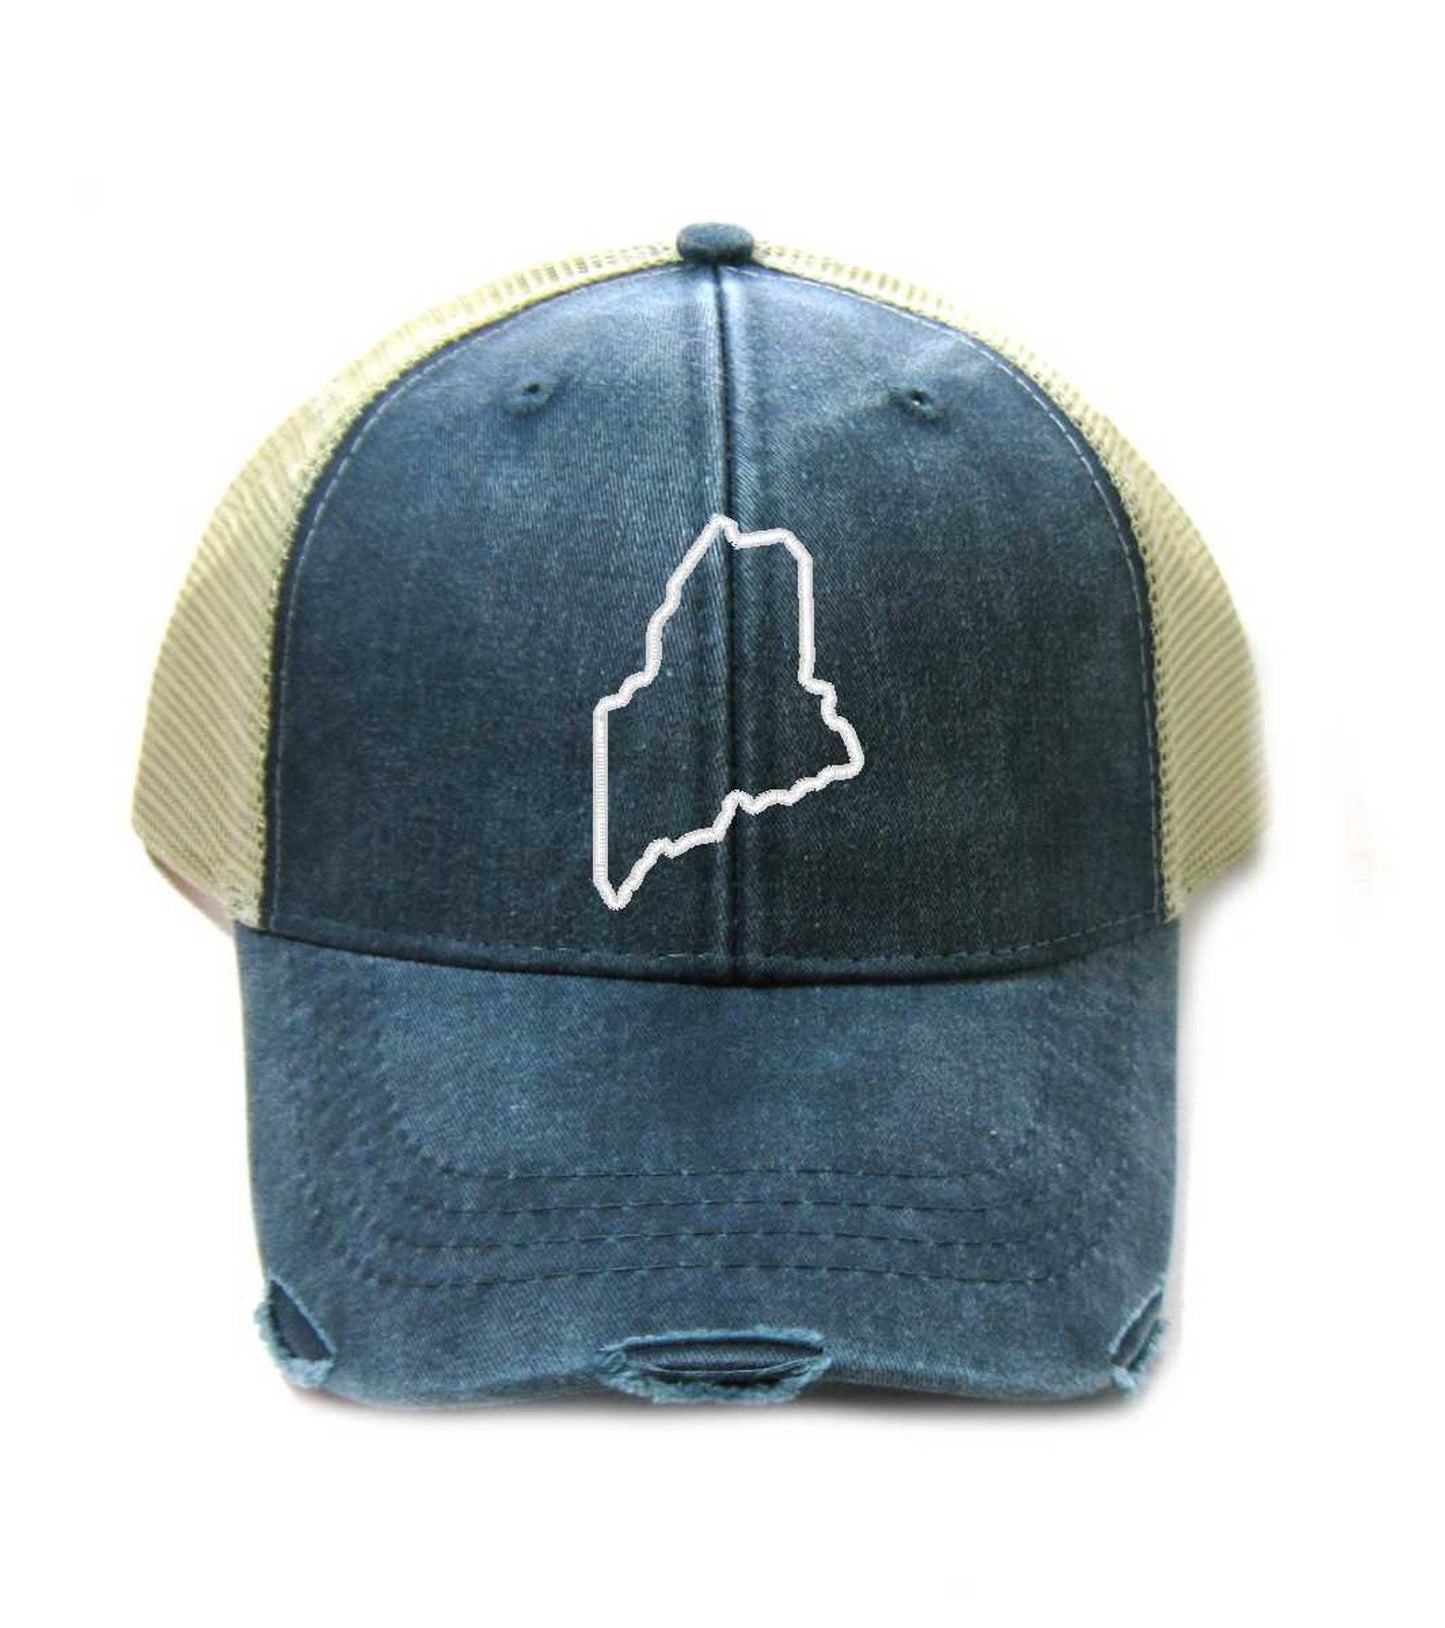 Maine Hat - Distressed Snapback Trucker Hat - Maine State Outline - Many Colors Available